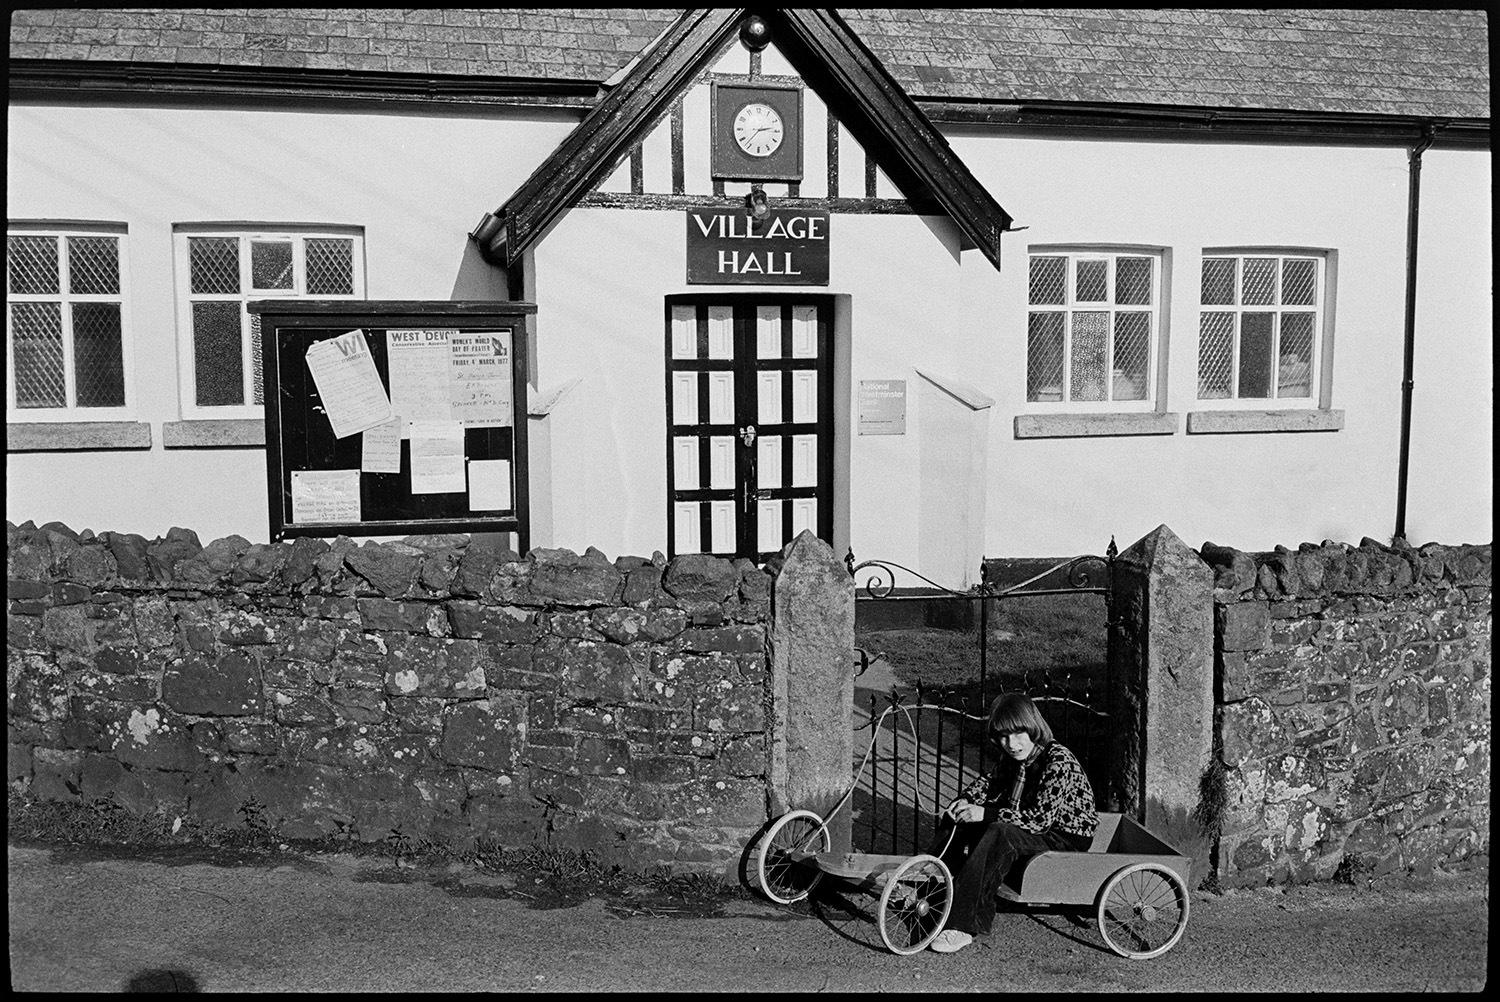 Village Hall. 
[Kings Nympton Village Hall. A child on a soap box is outside the gate to the hall. A clock and notice board at next to the hall entrance.]